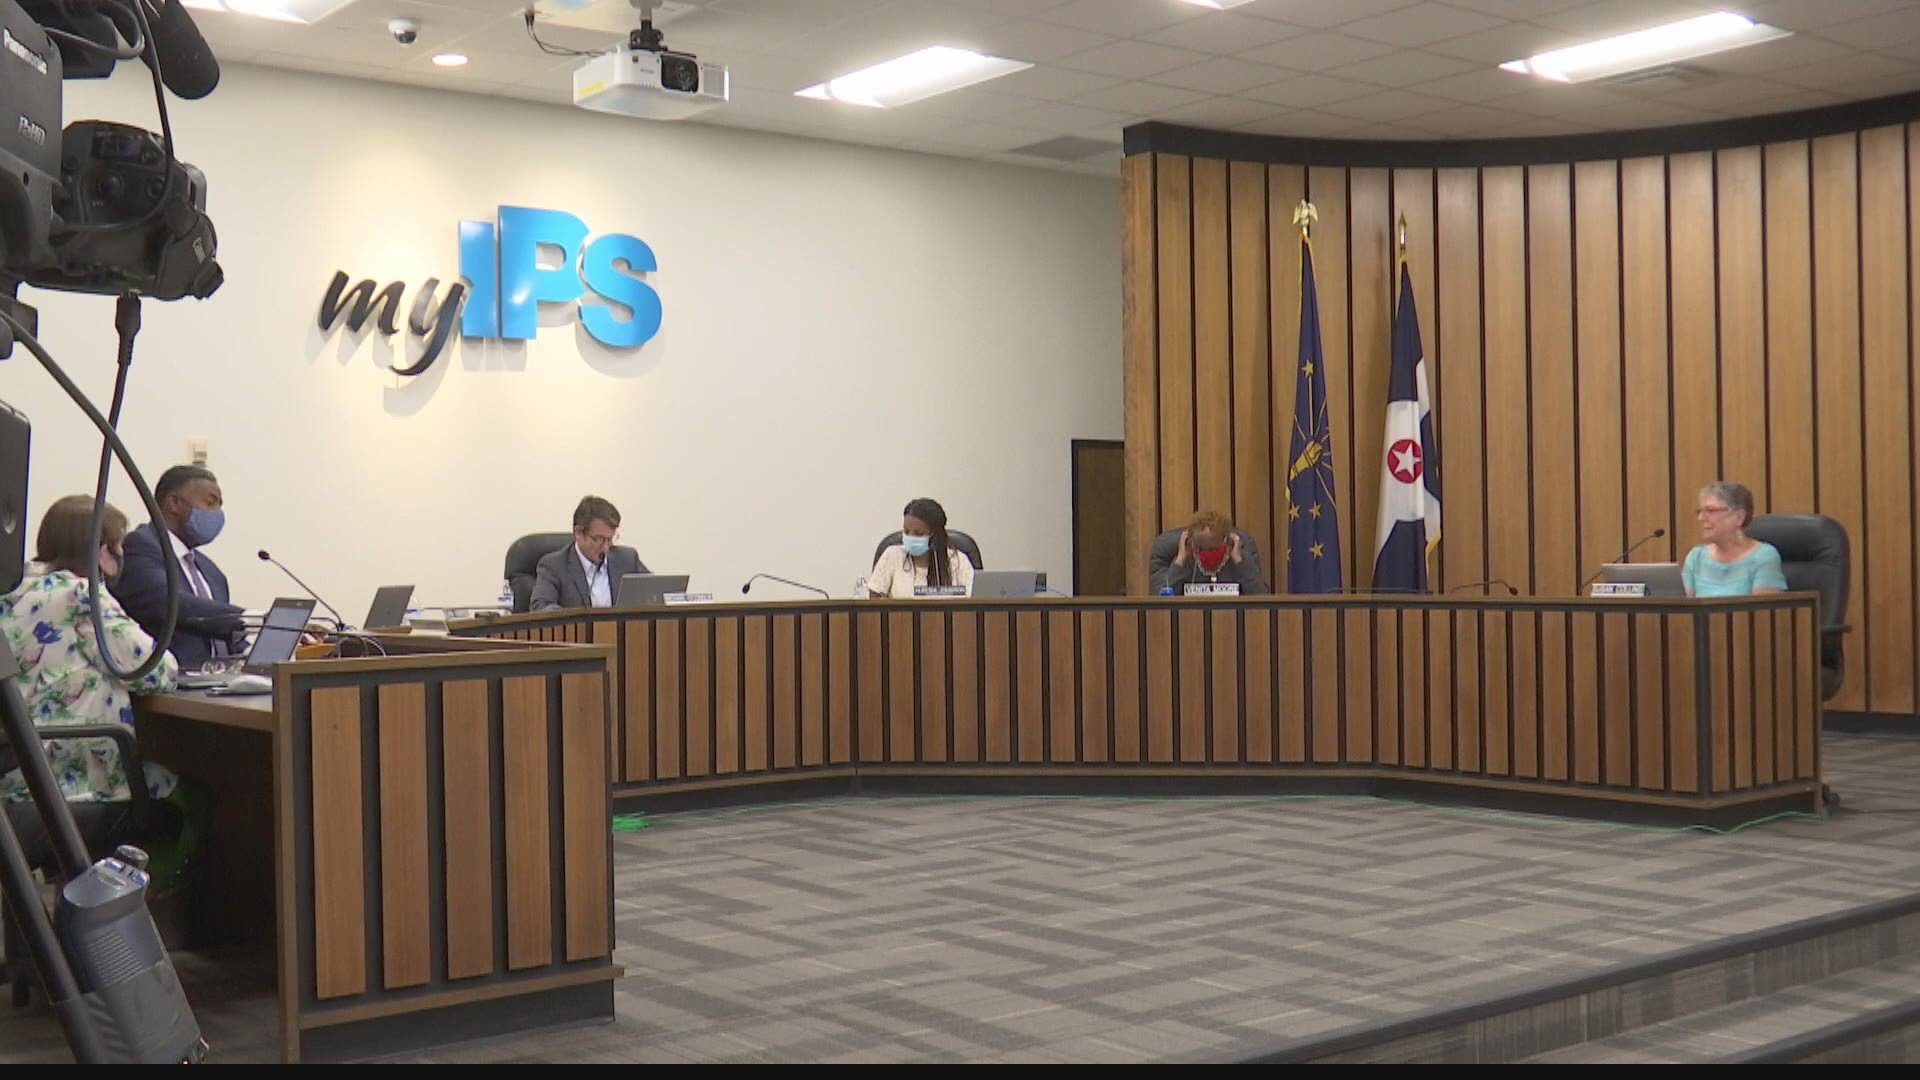 The Indianapolis Public Schools board adopted a new policy to address racial equity within the school system Thursday night.